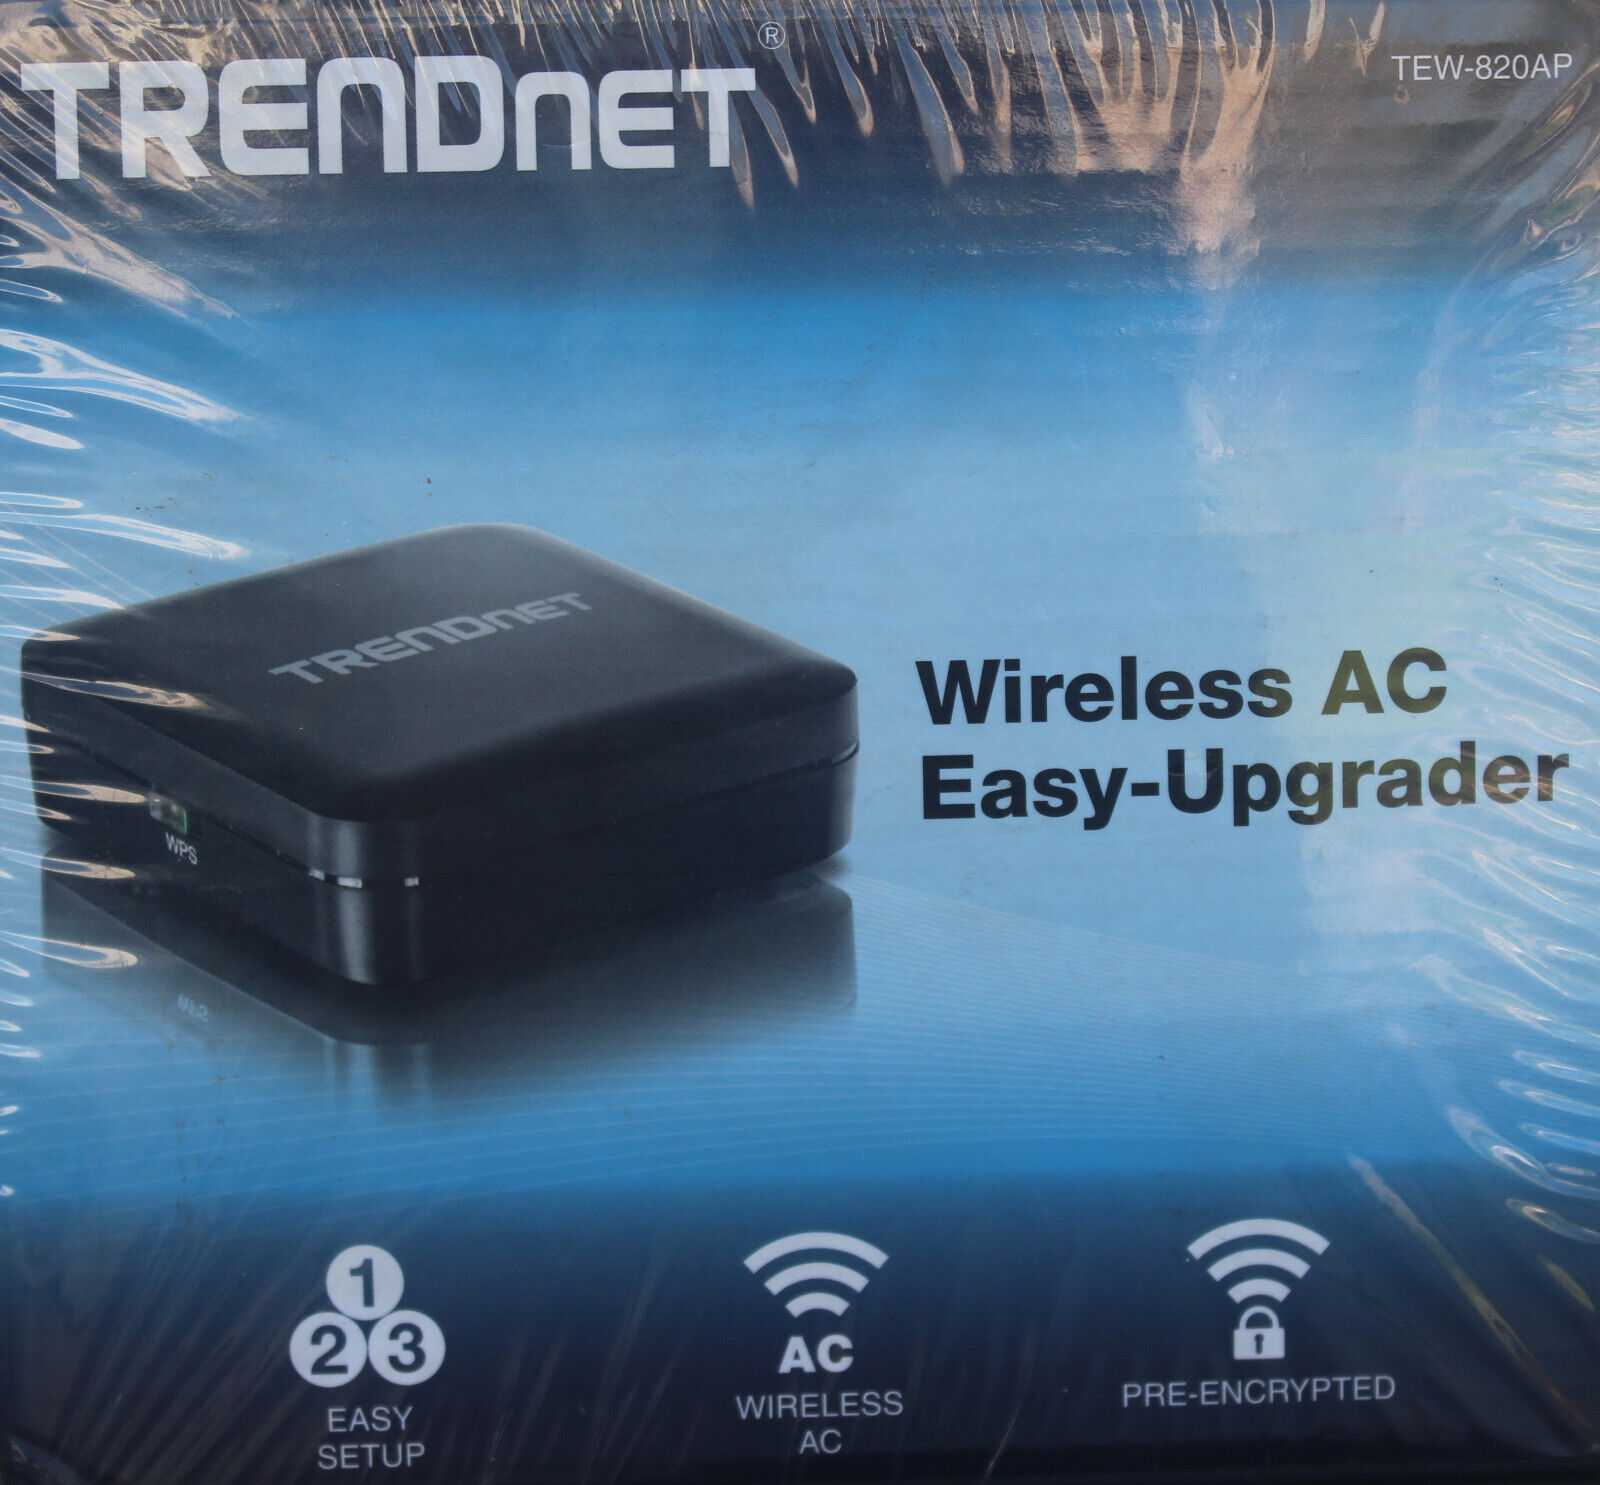 TRENDnet Wireless AC Easy-Upgrader TEW-820AP ** NEW ** FACTORY SEALED **